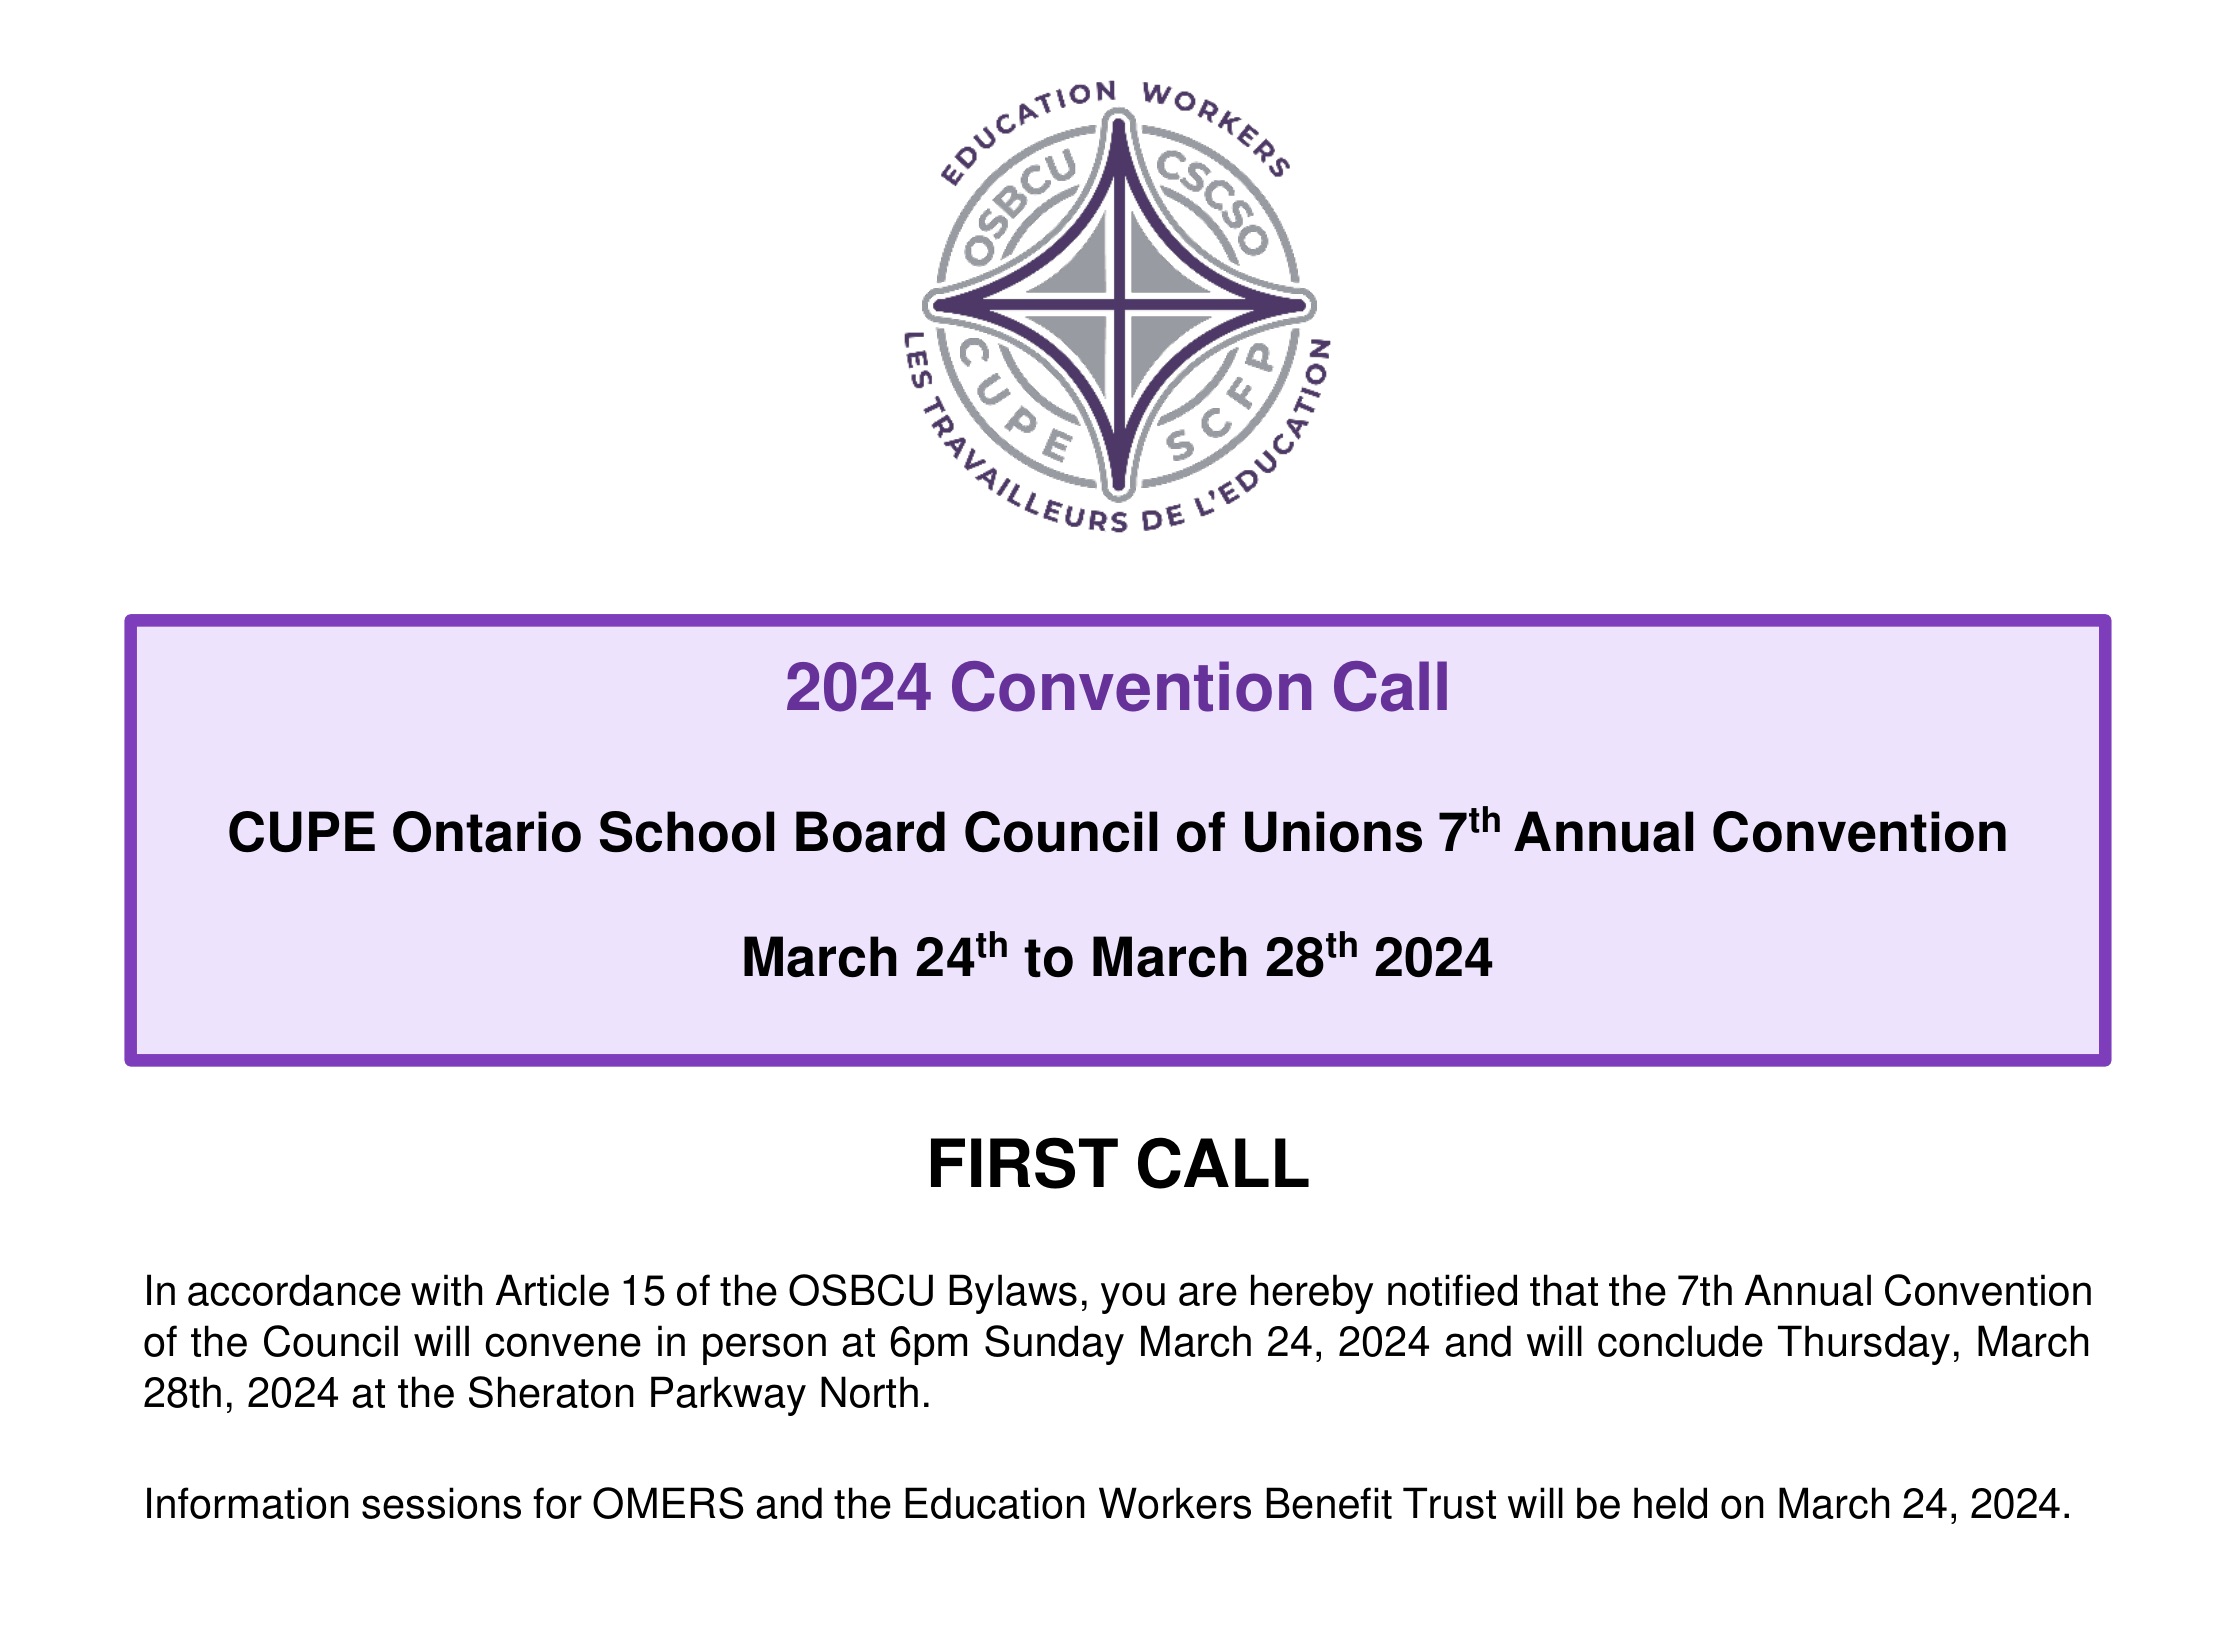 2024 CUPE Ontario School Board Council of Unions 7th Annual Convention